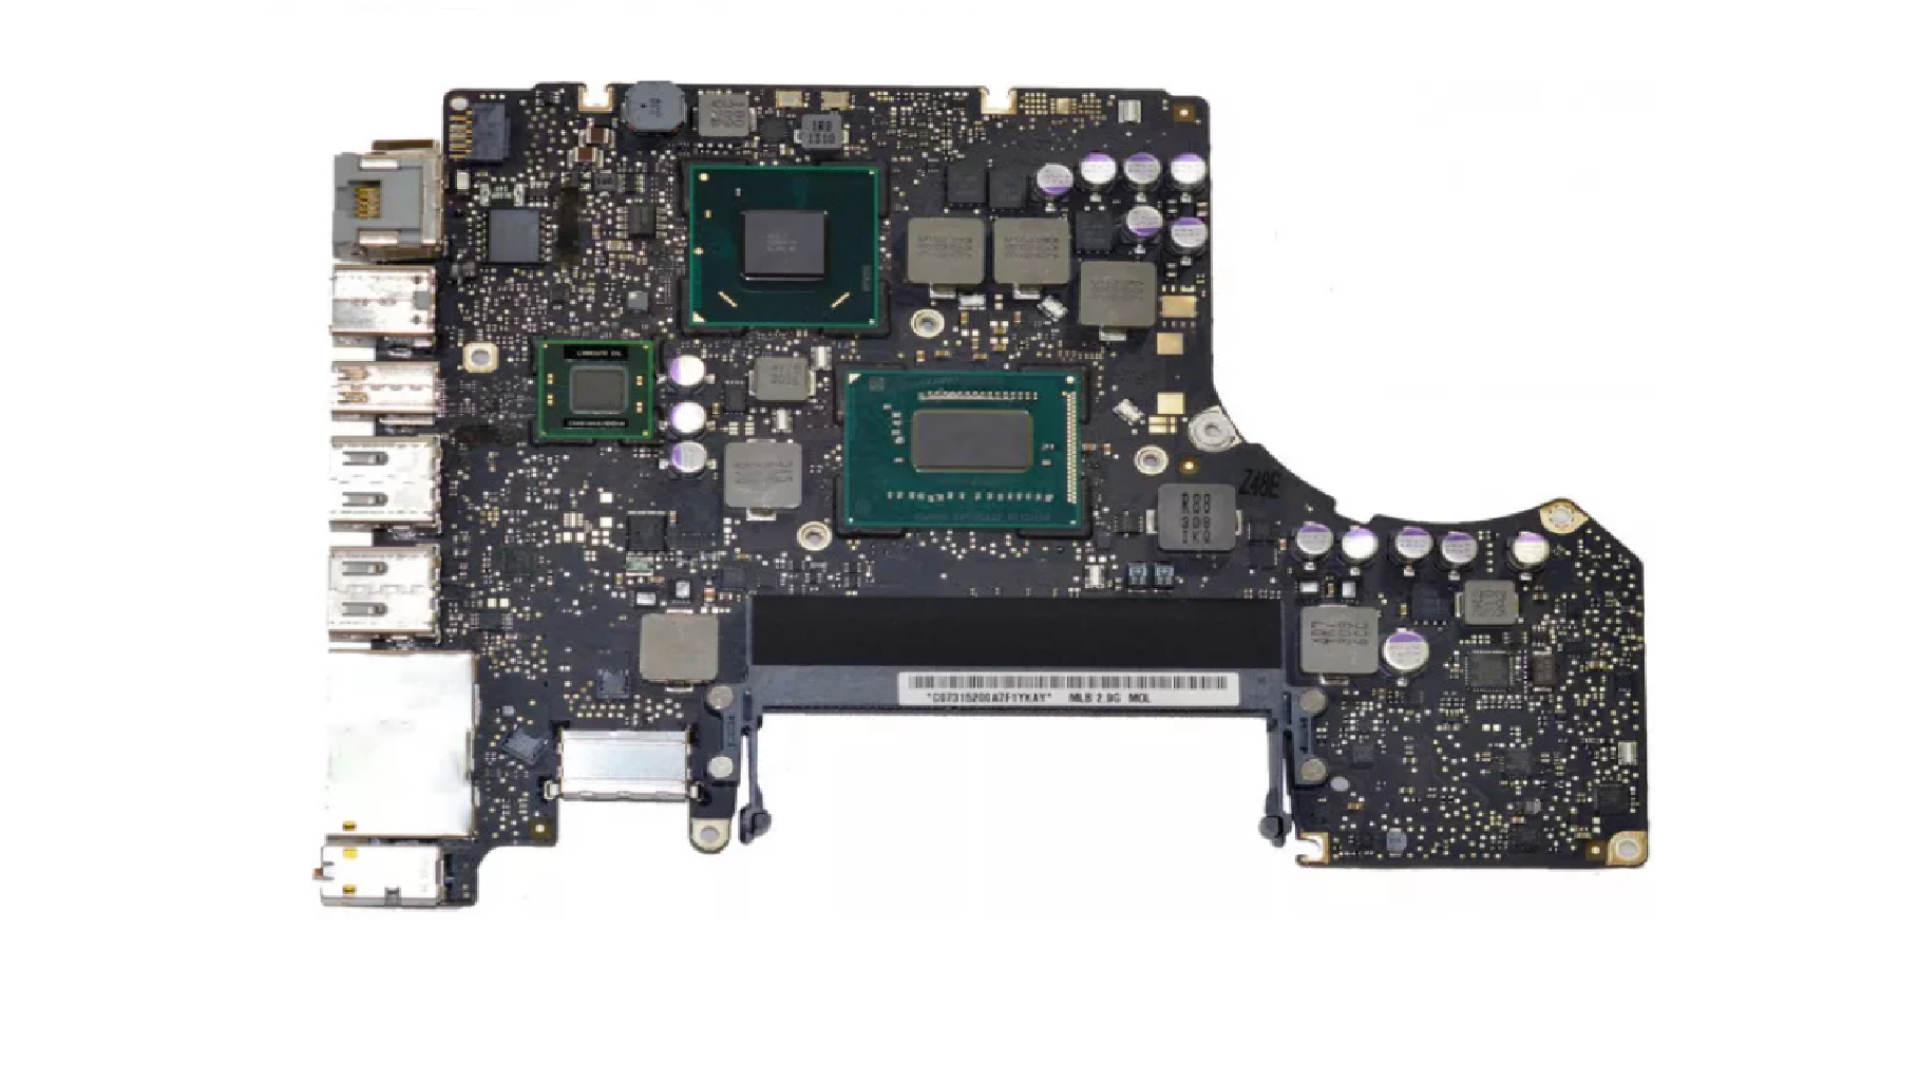 https://macnest.com/image/cache/catalog/Blogs/A1278 logic board replacement /unnamed (6)-1920x1080.png